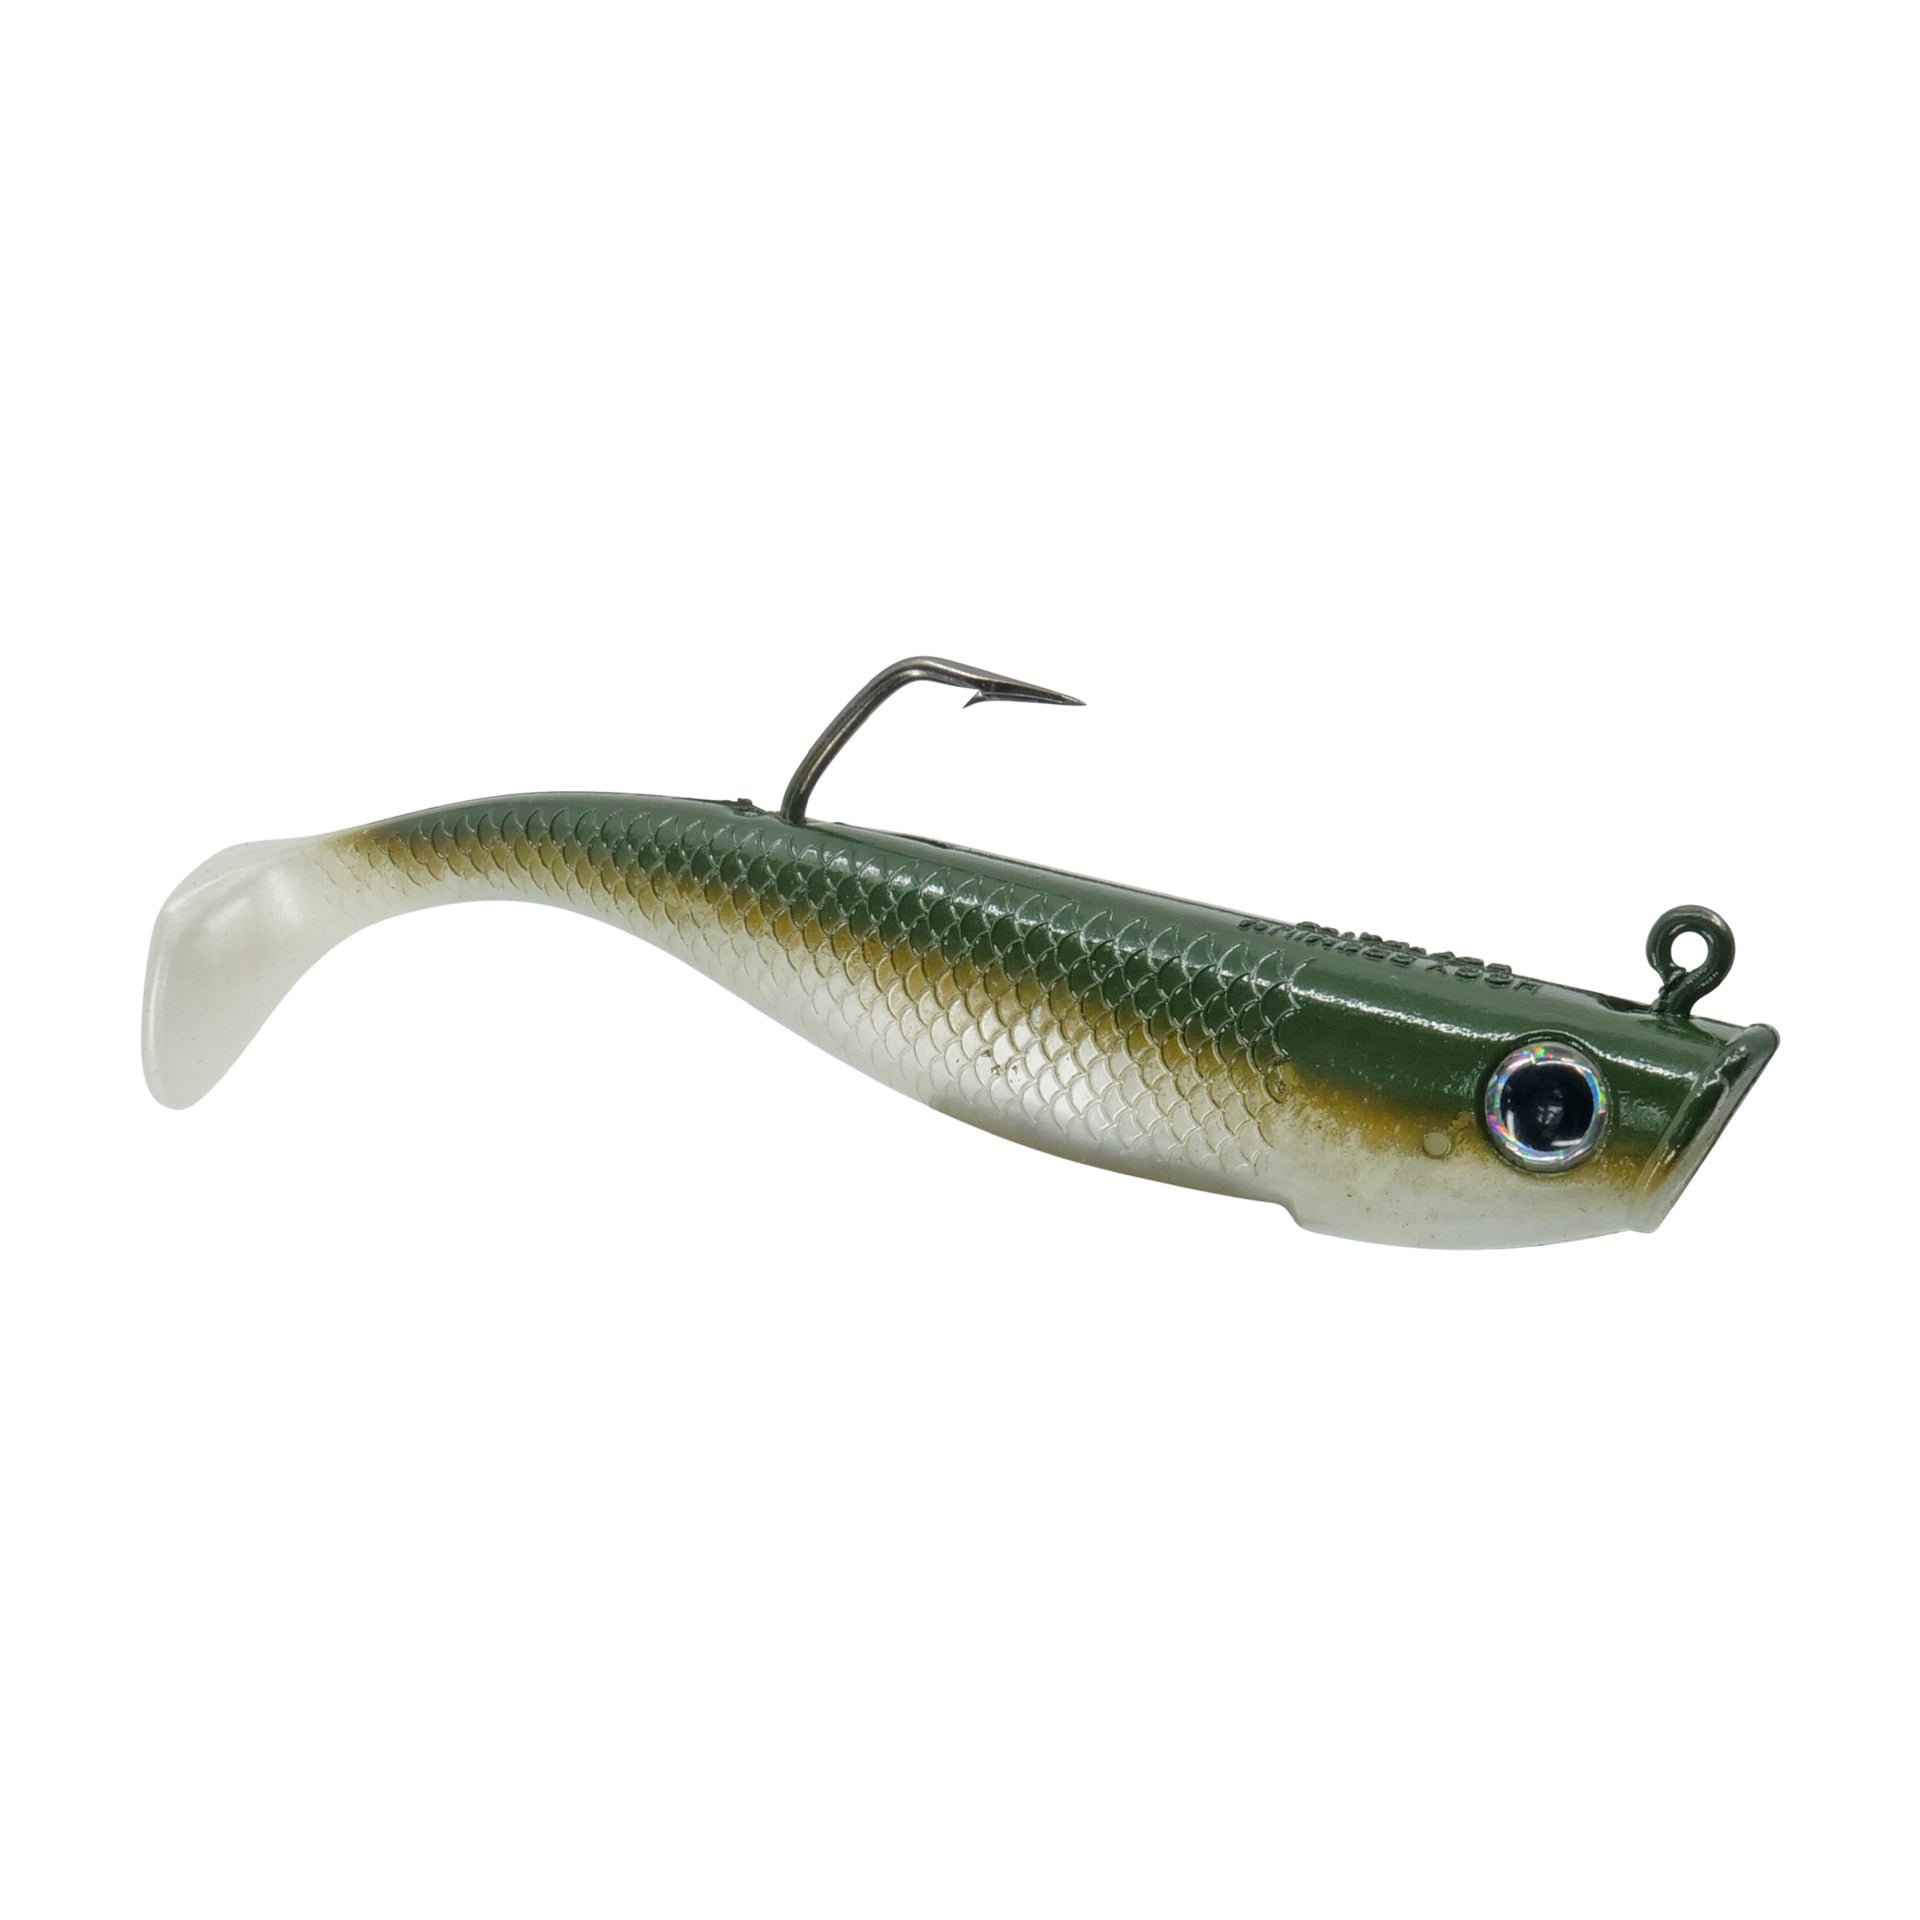 Best lure to use for tarpon fishing inshore? (Im in cayman and